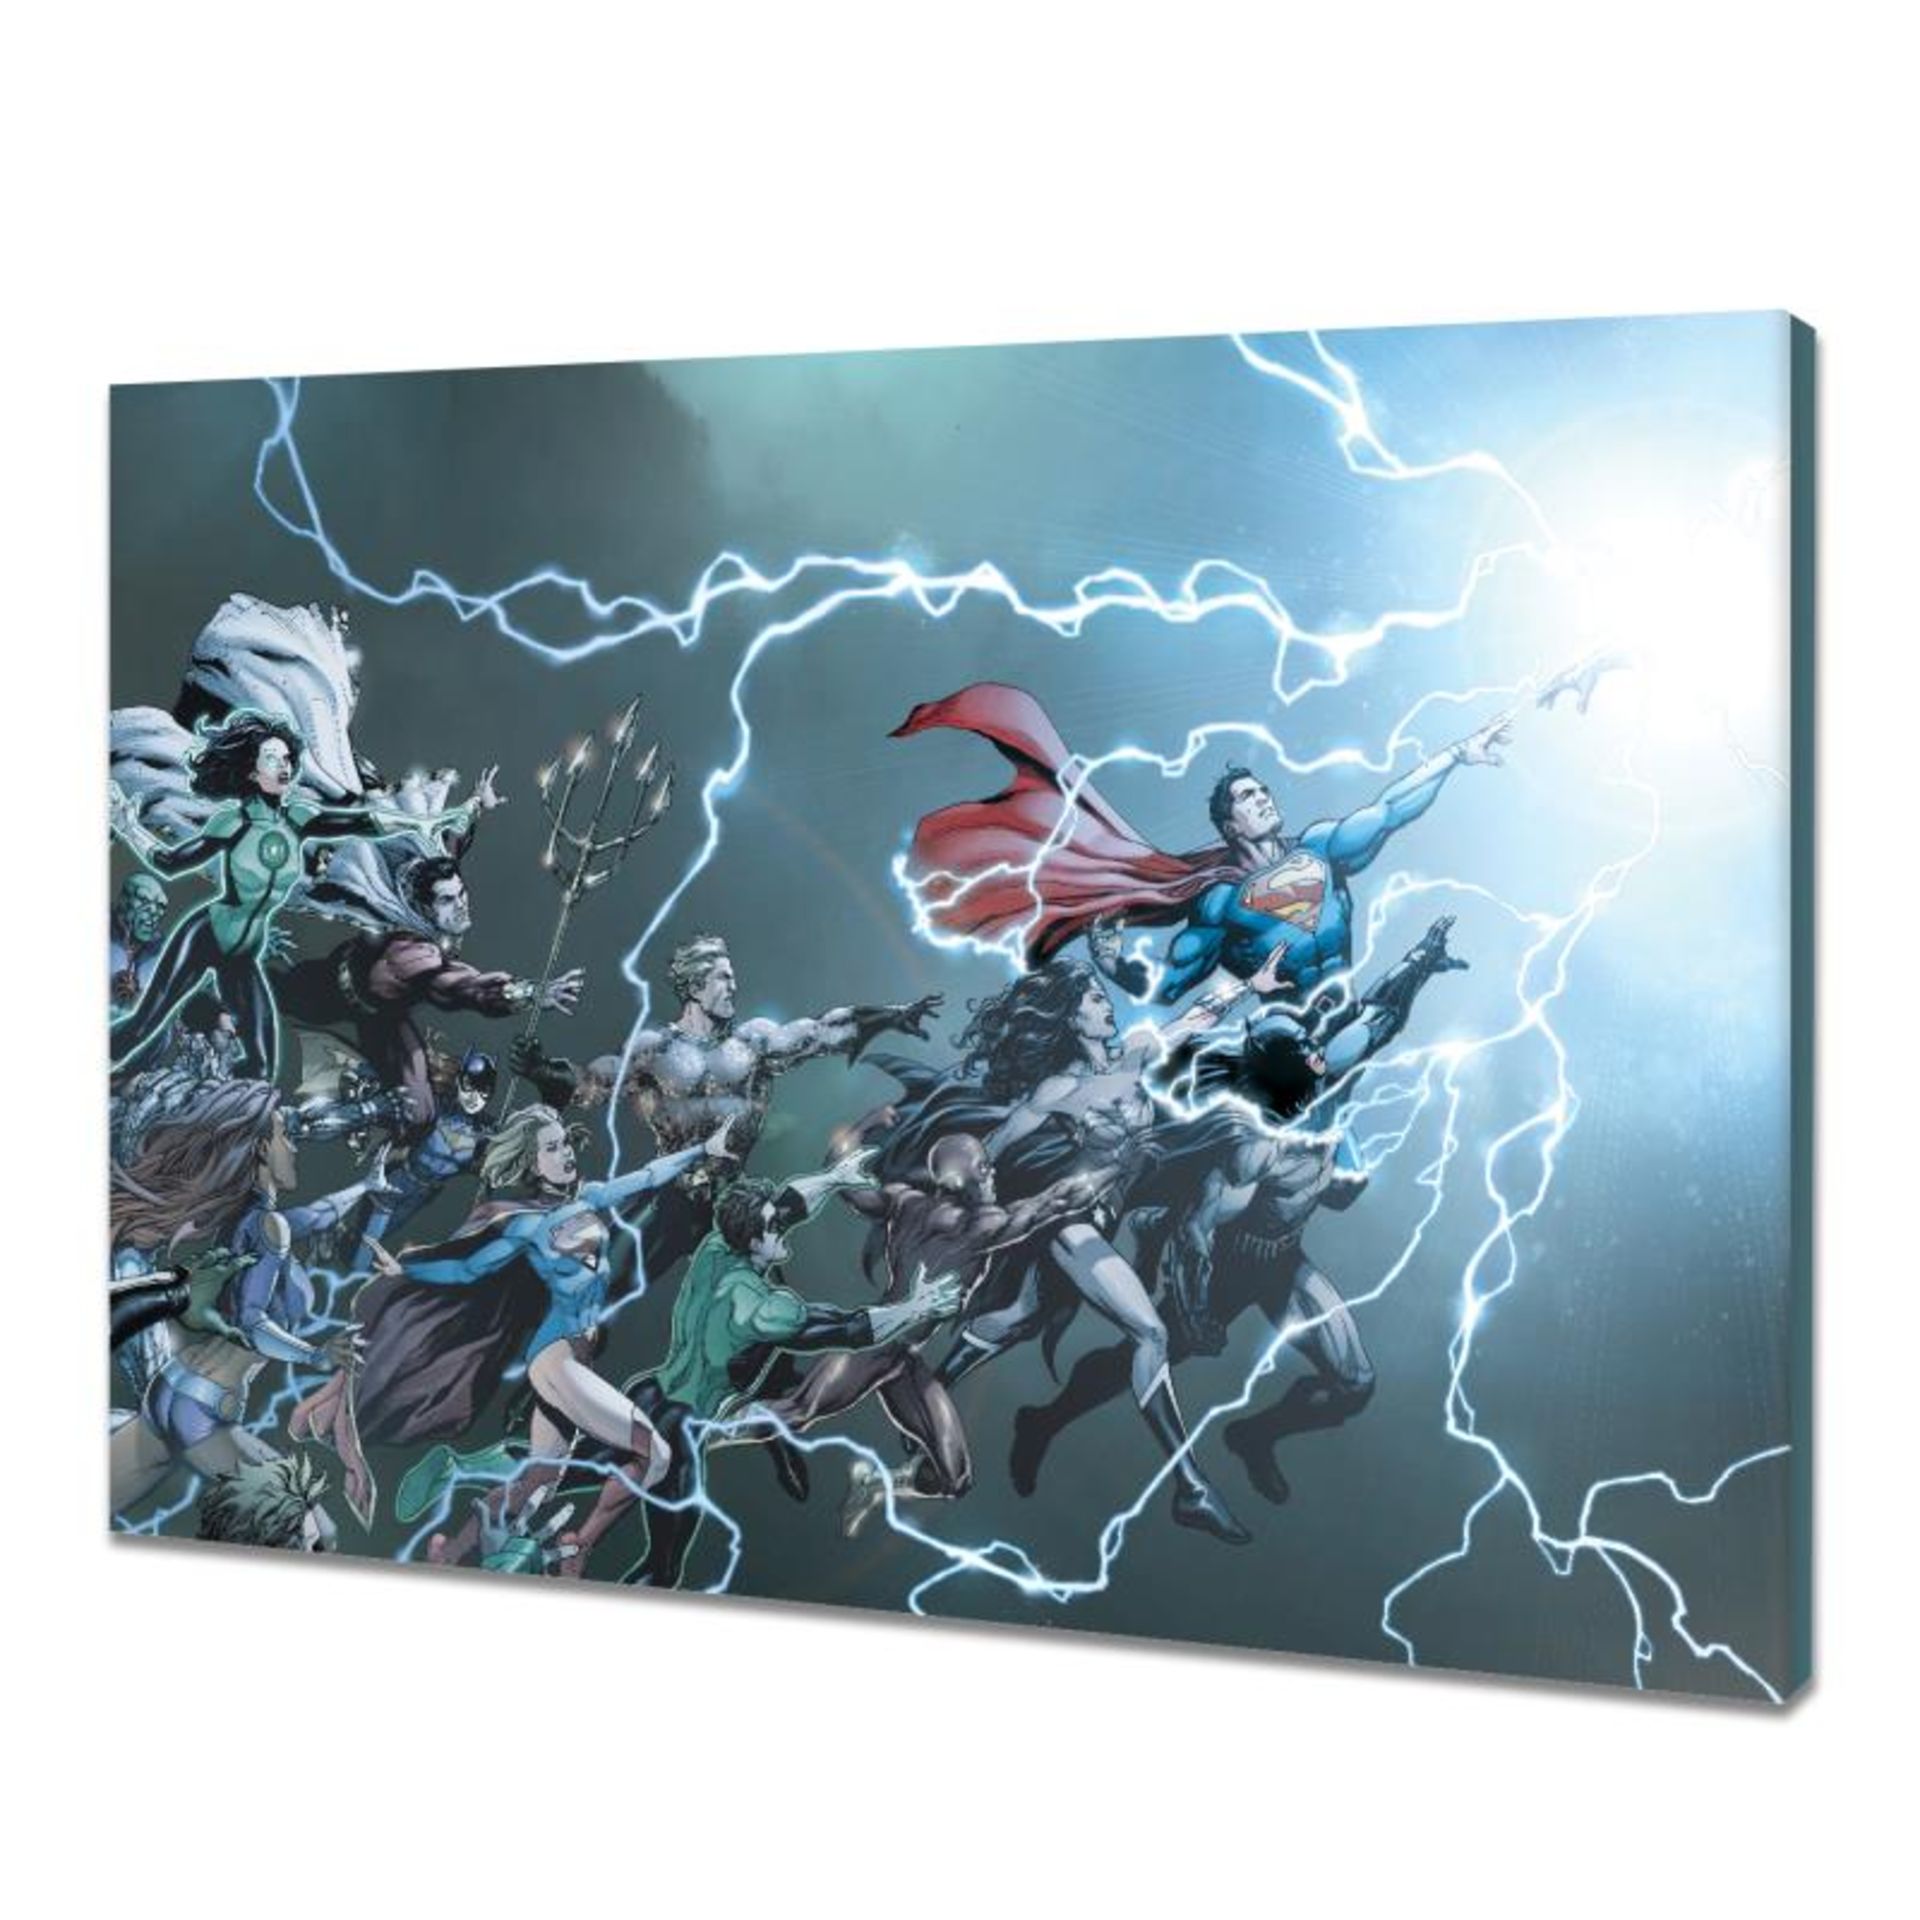 DC Comics, "DC Universe: Rebirth #1" Numbered Limited Edition Giclee on Canvas b - Image 3 of 3